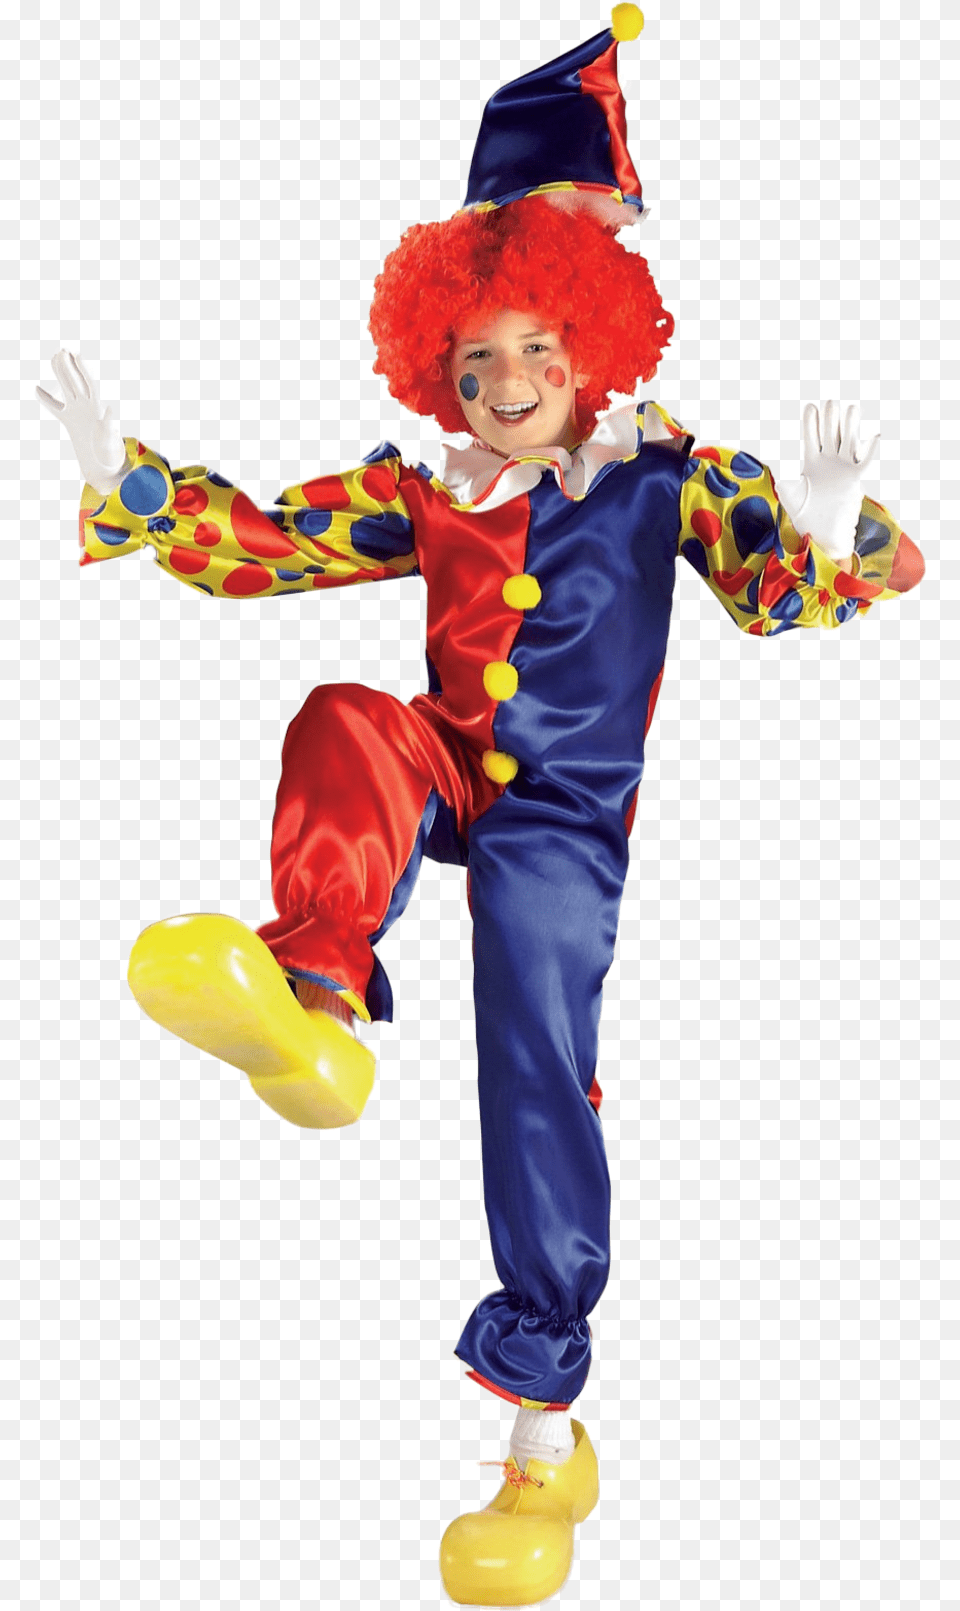 Clown Costume Dressing Up As Clowns, Baby, Clothing, Performer, Person Png